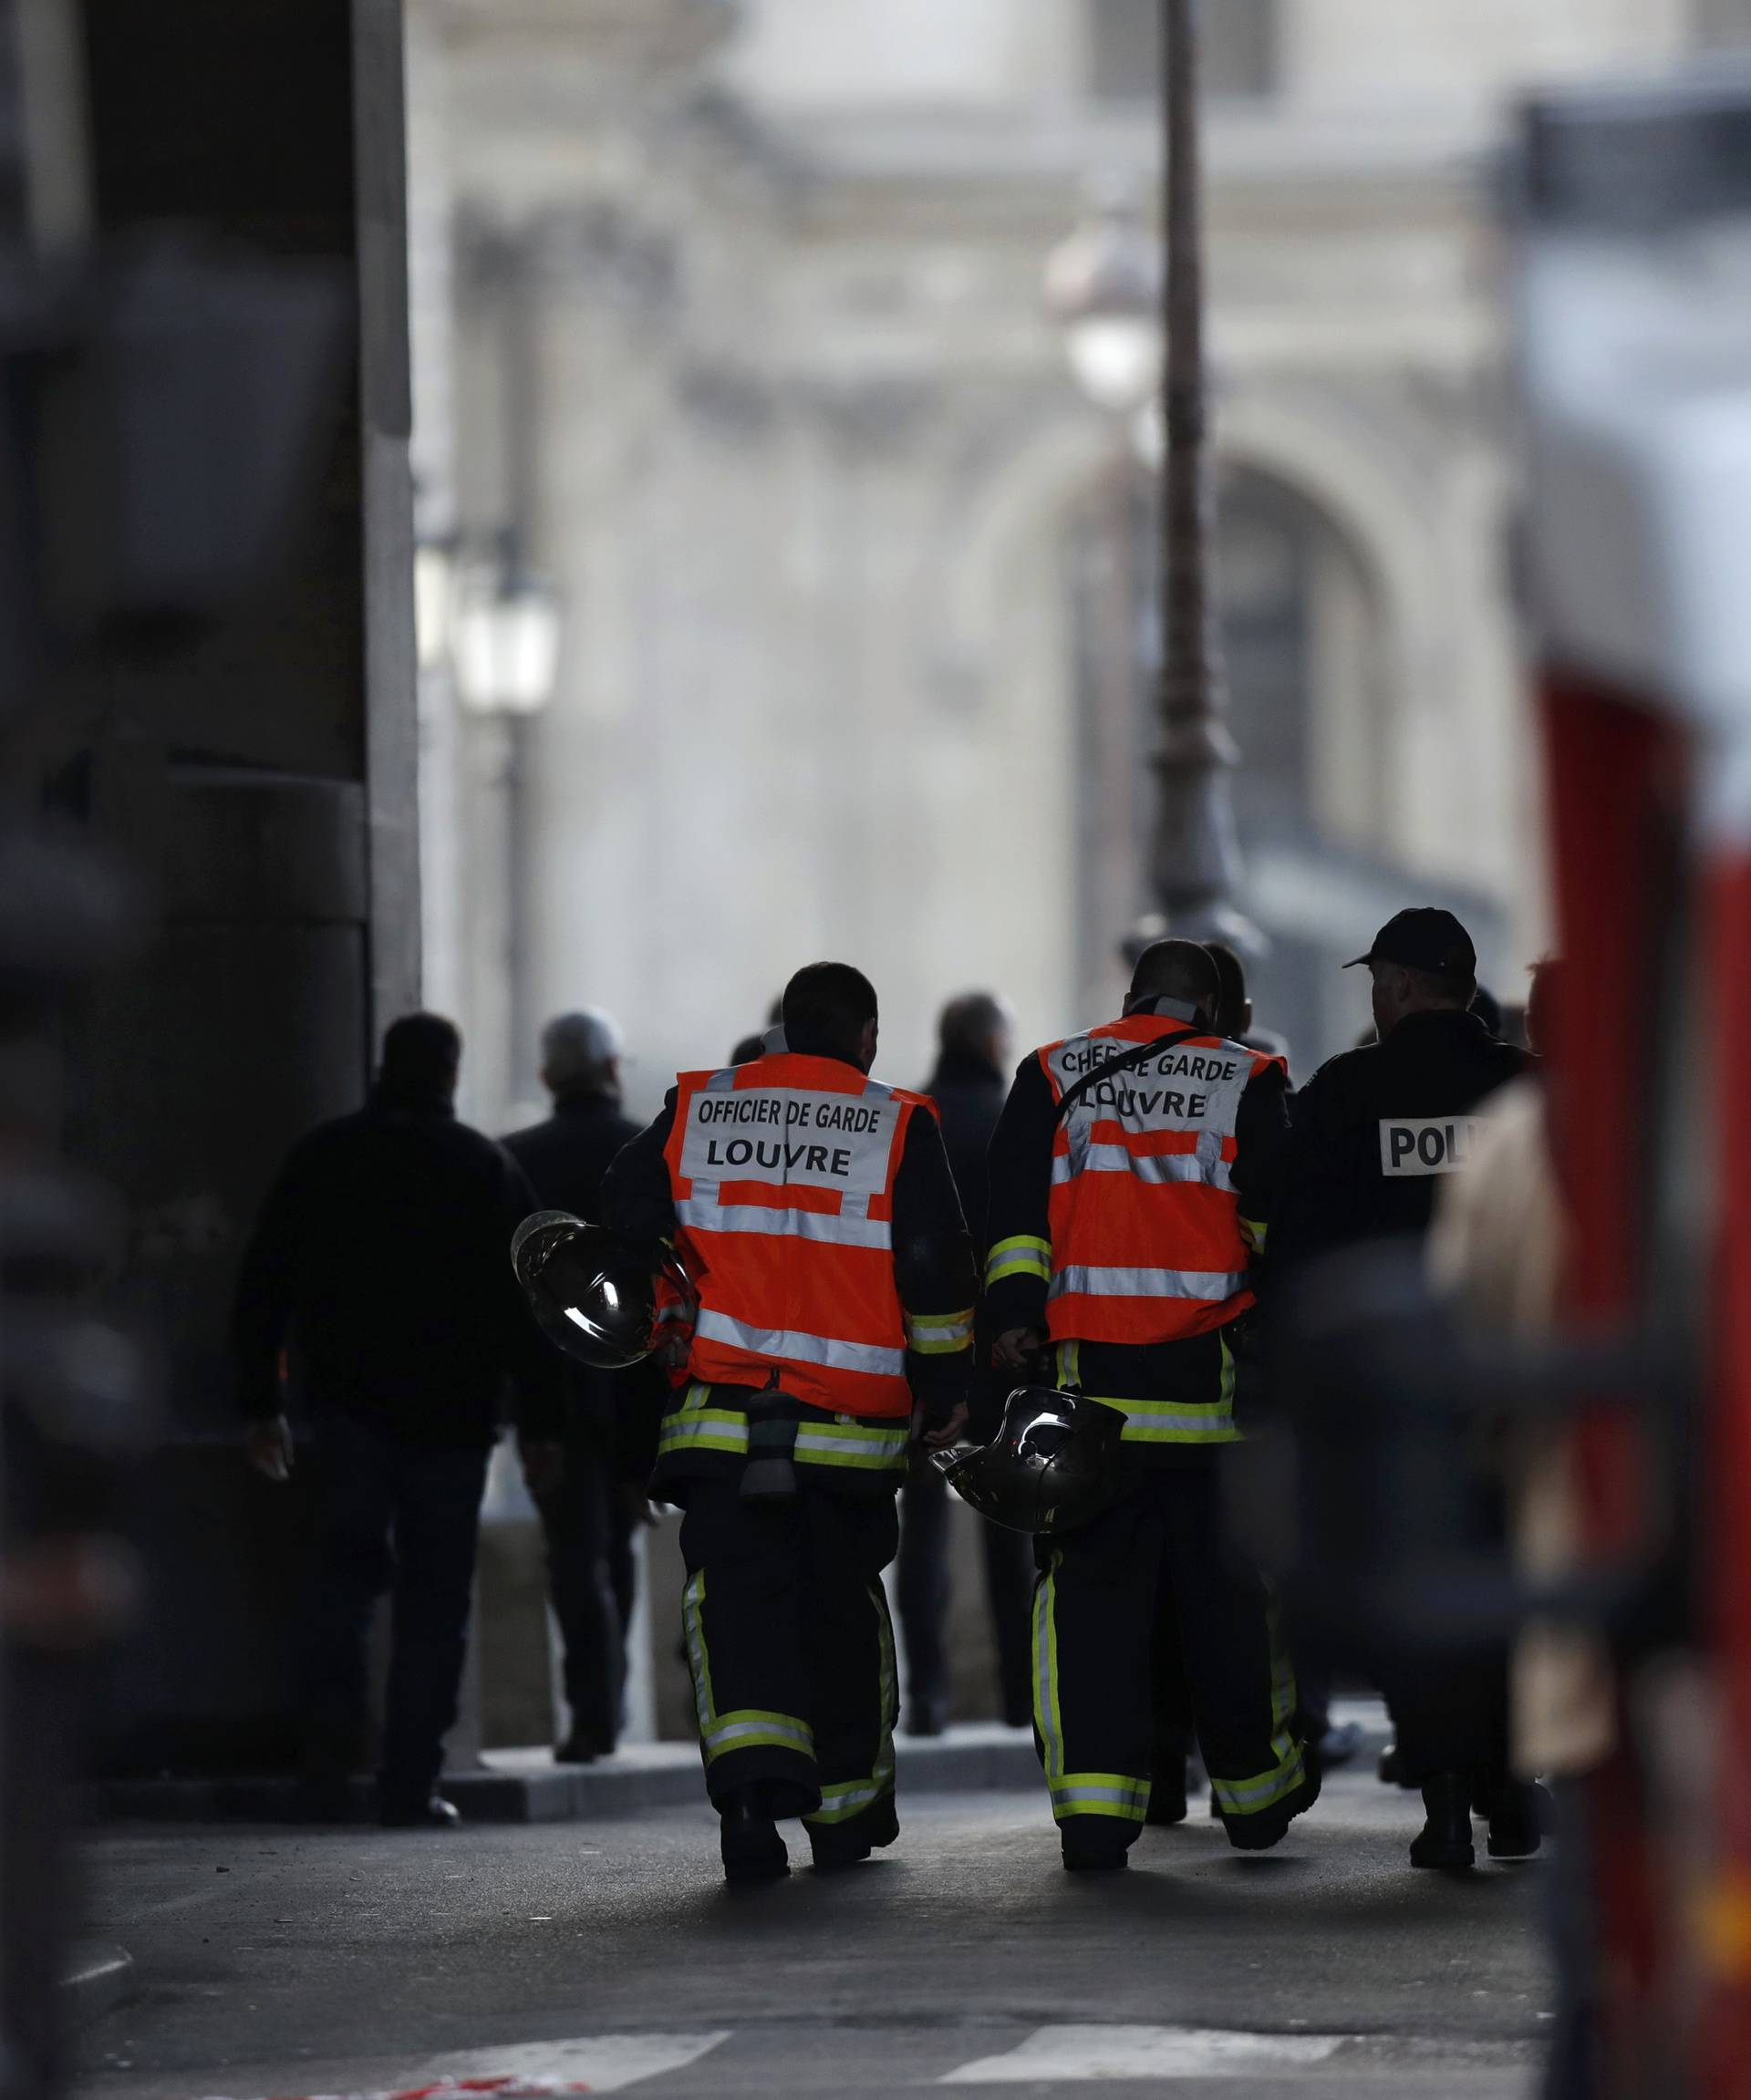 French firefighters and police are seen at the site near the Louvre Pyramid in Paris